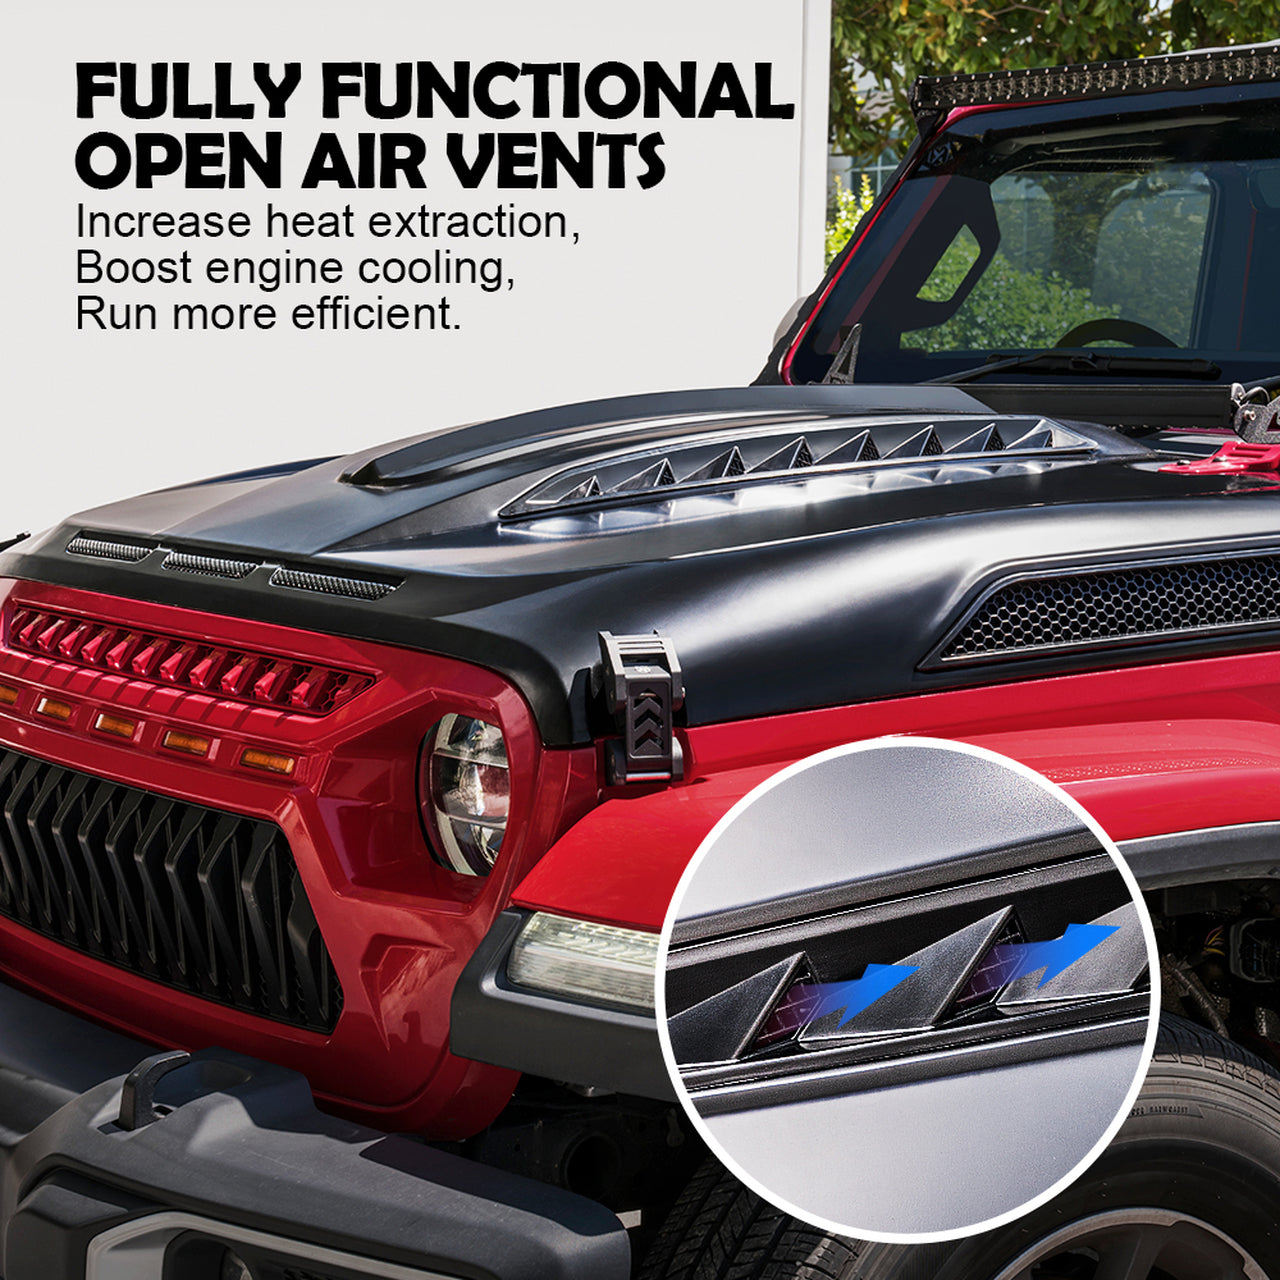 Crawlertec Unleash Series Hood with Functional Air Vents for 2018+ Jeep Wrangler JL and Gladiator JT